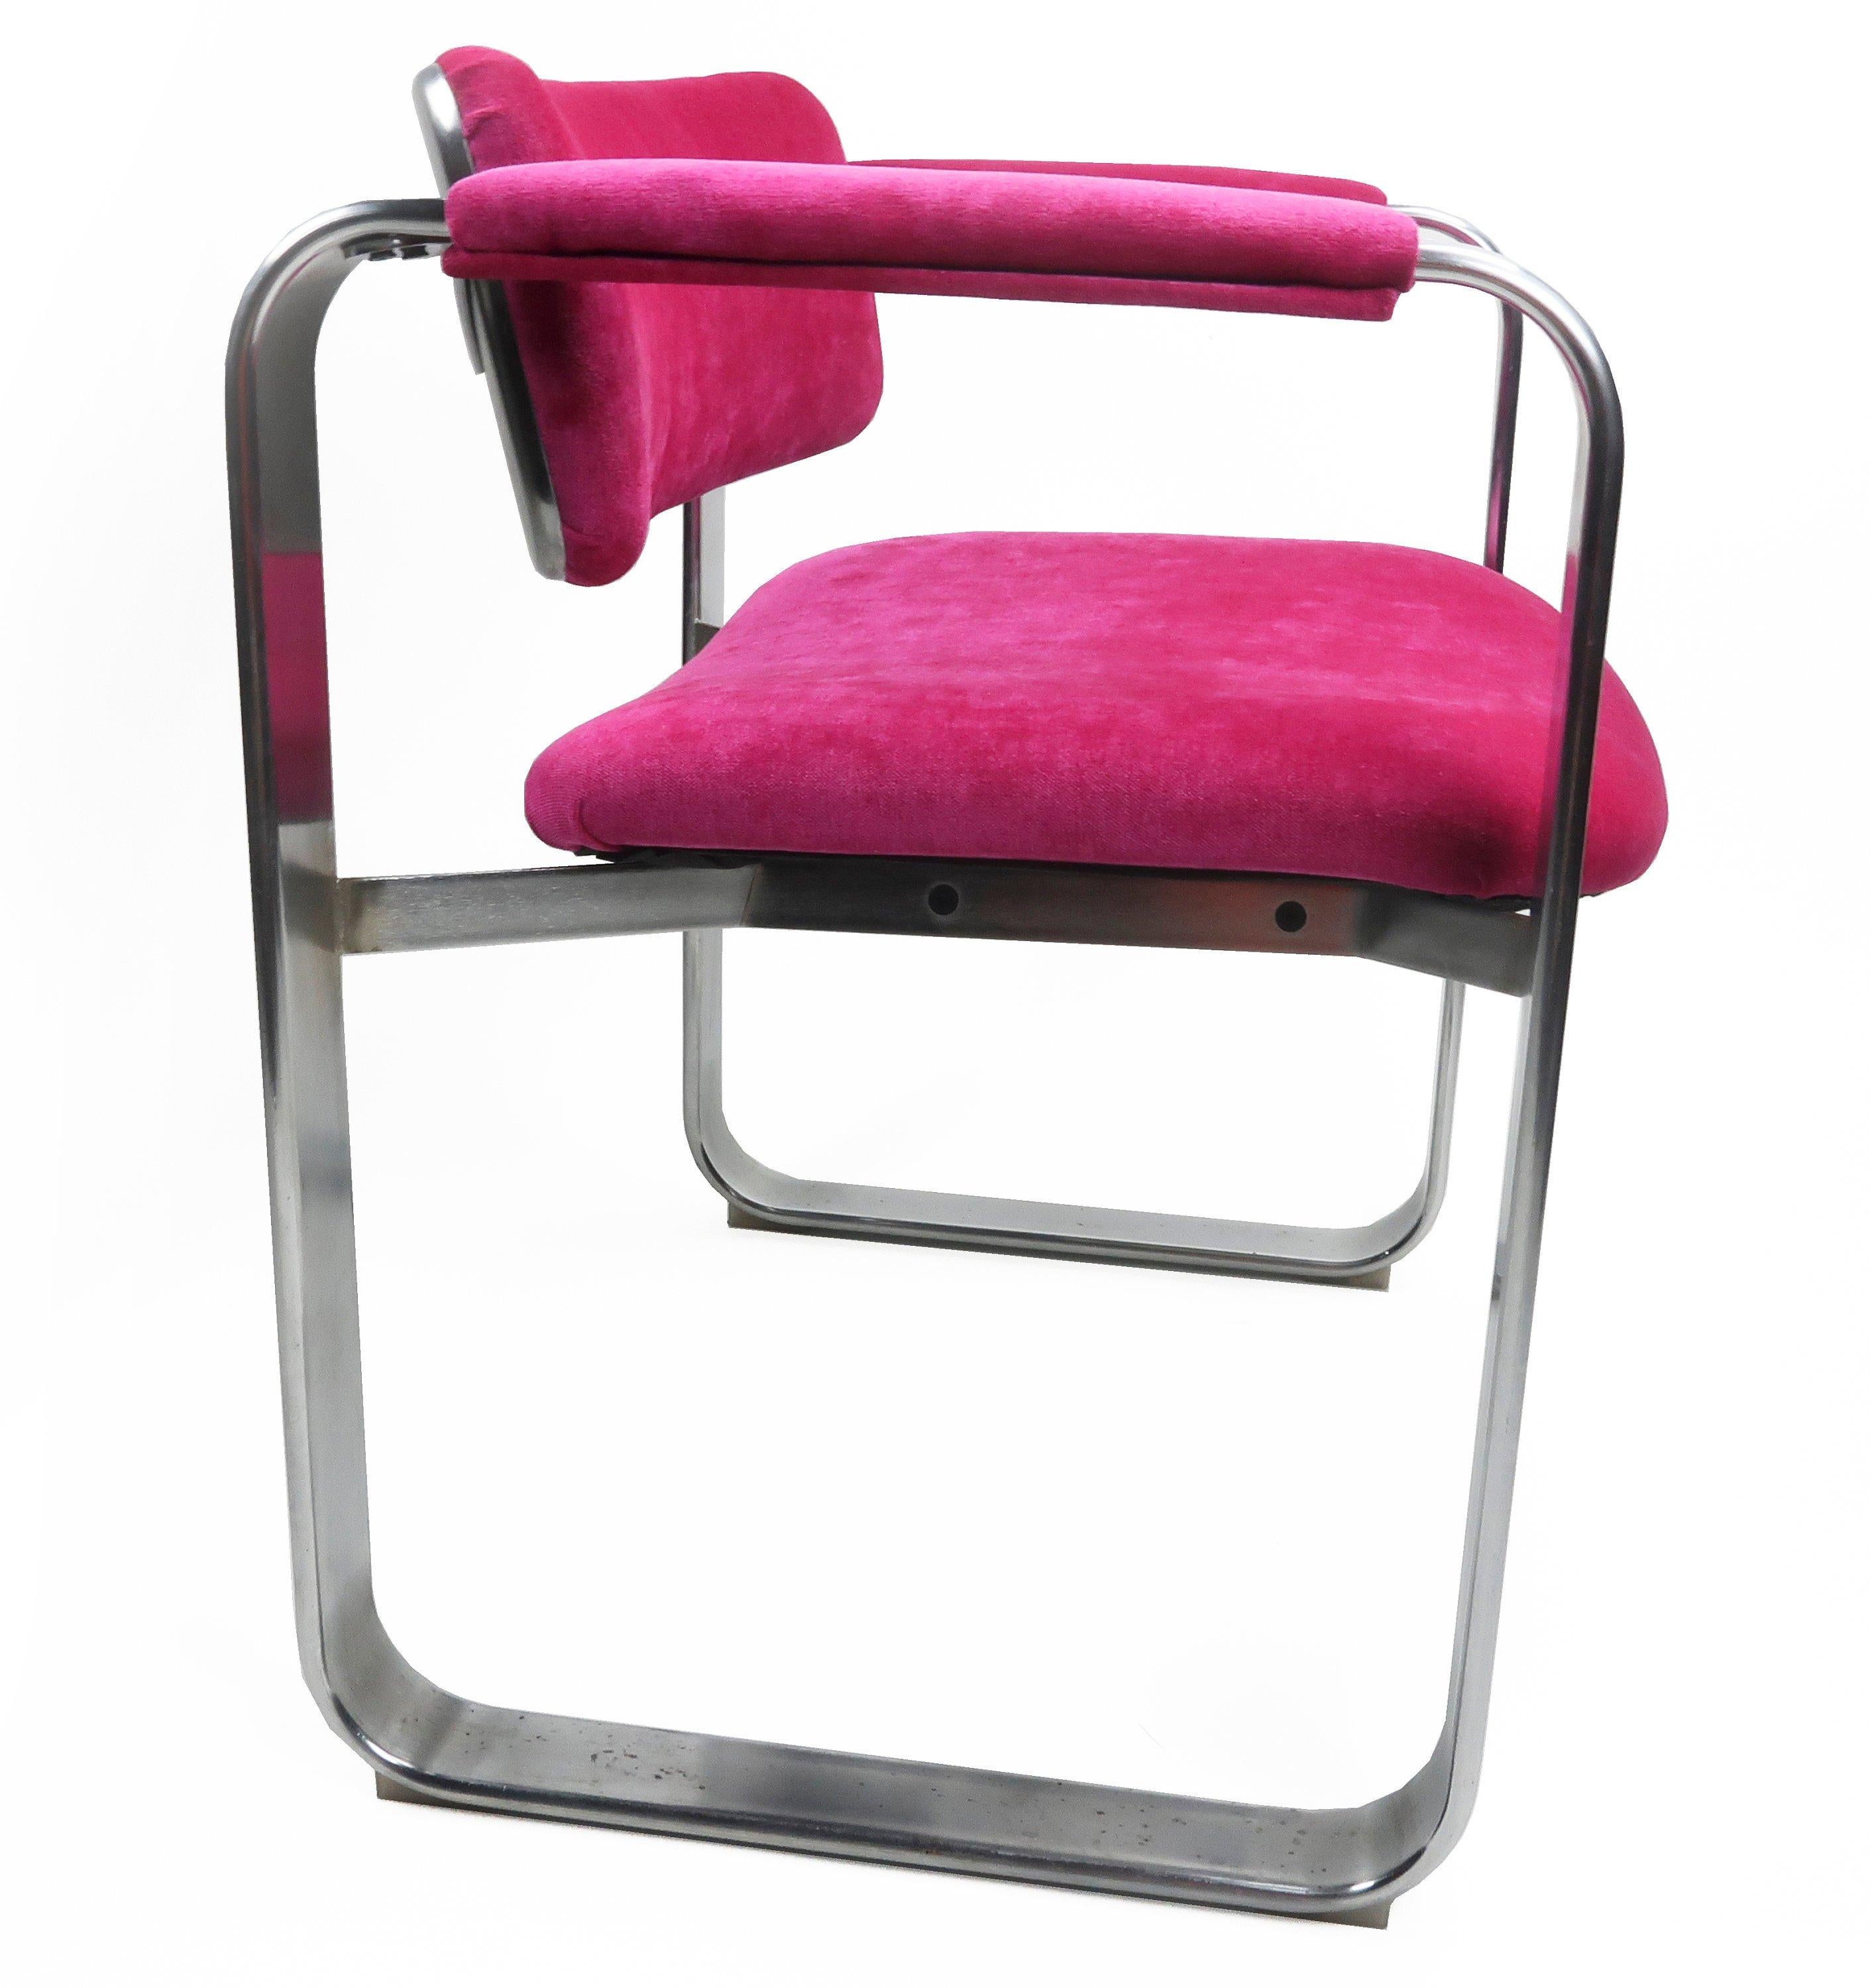 A dazzling Scandinavian Modern executive armchair by famed Finnish designer Eero Aarnio for Mobel Italia (1968). The frame has a satin chrome finish with a stainless back. And new hot pink/fucshia chenille upholstery on the seat, back and arms.
 
